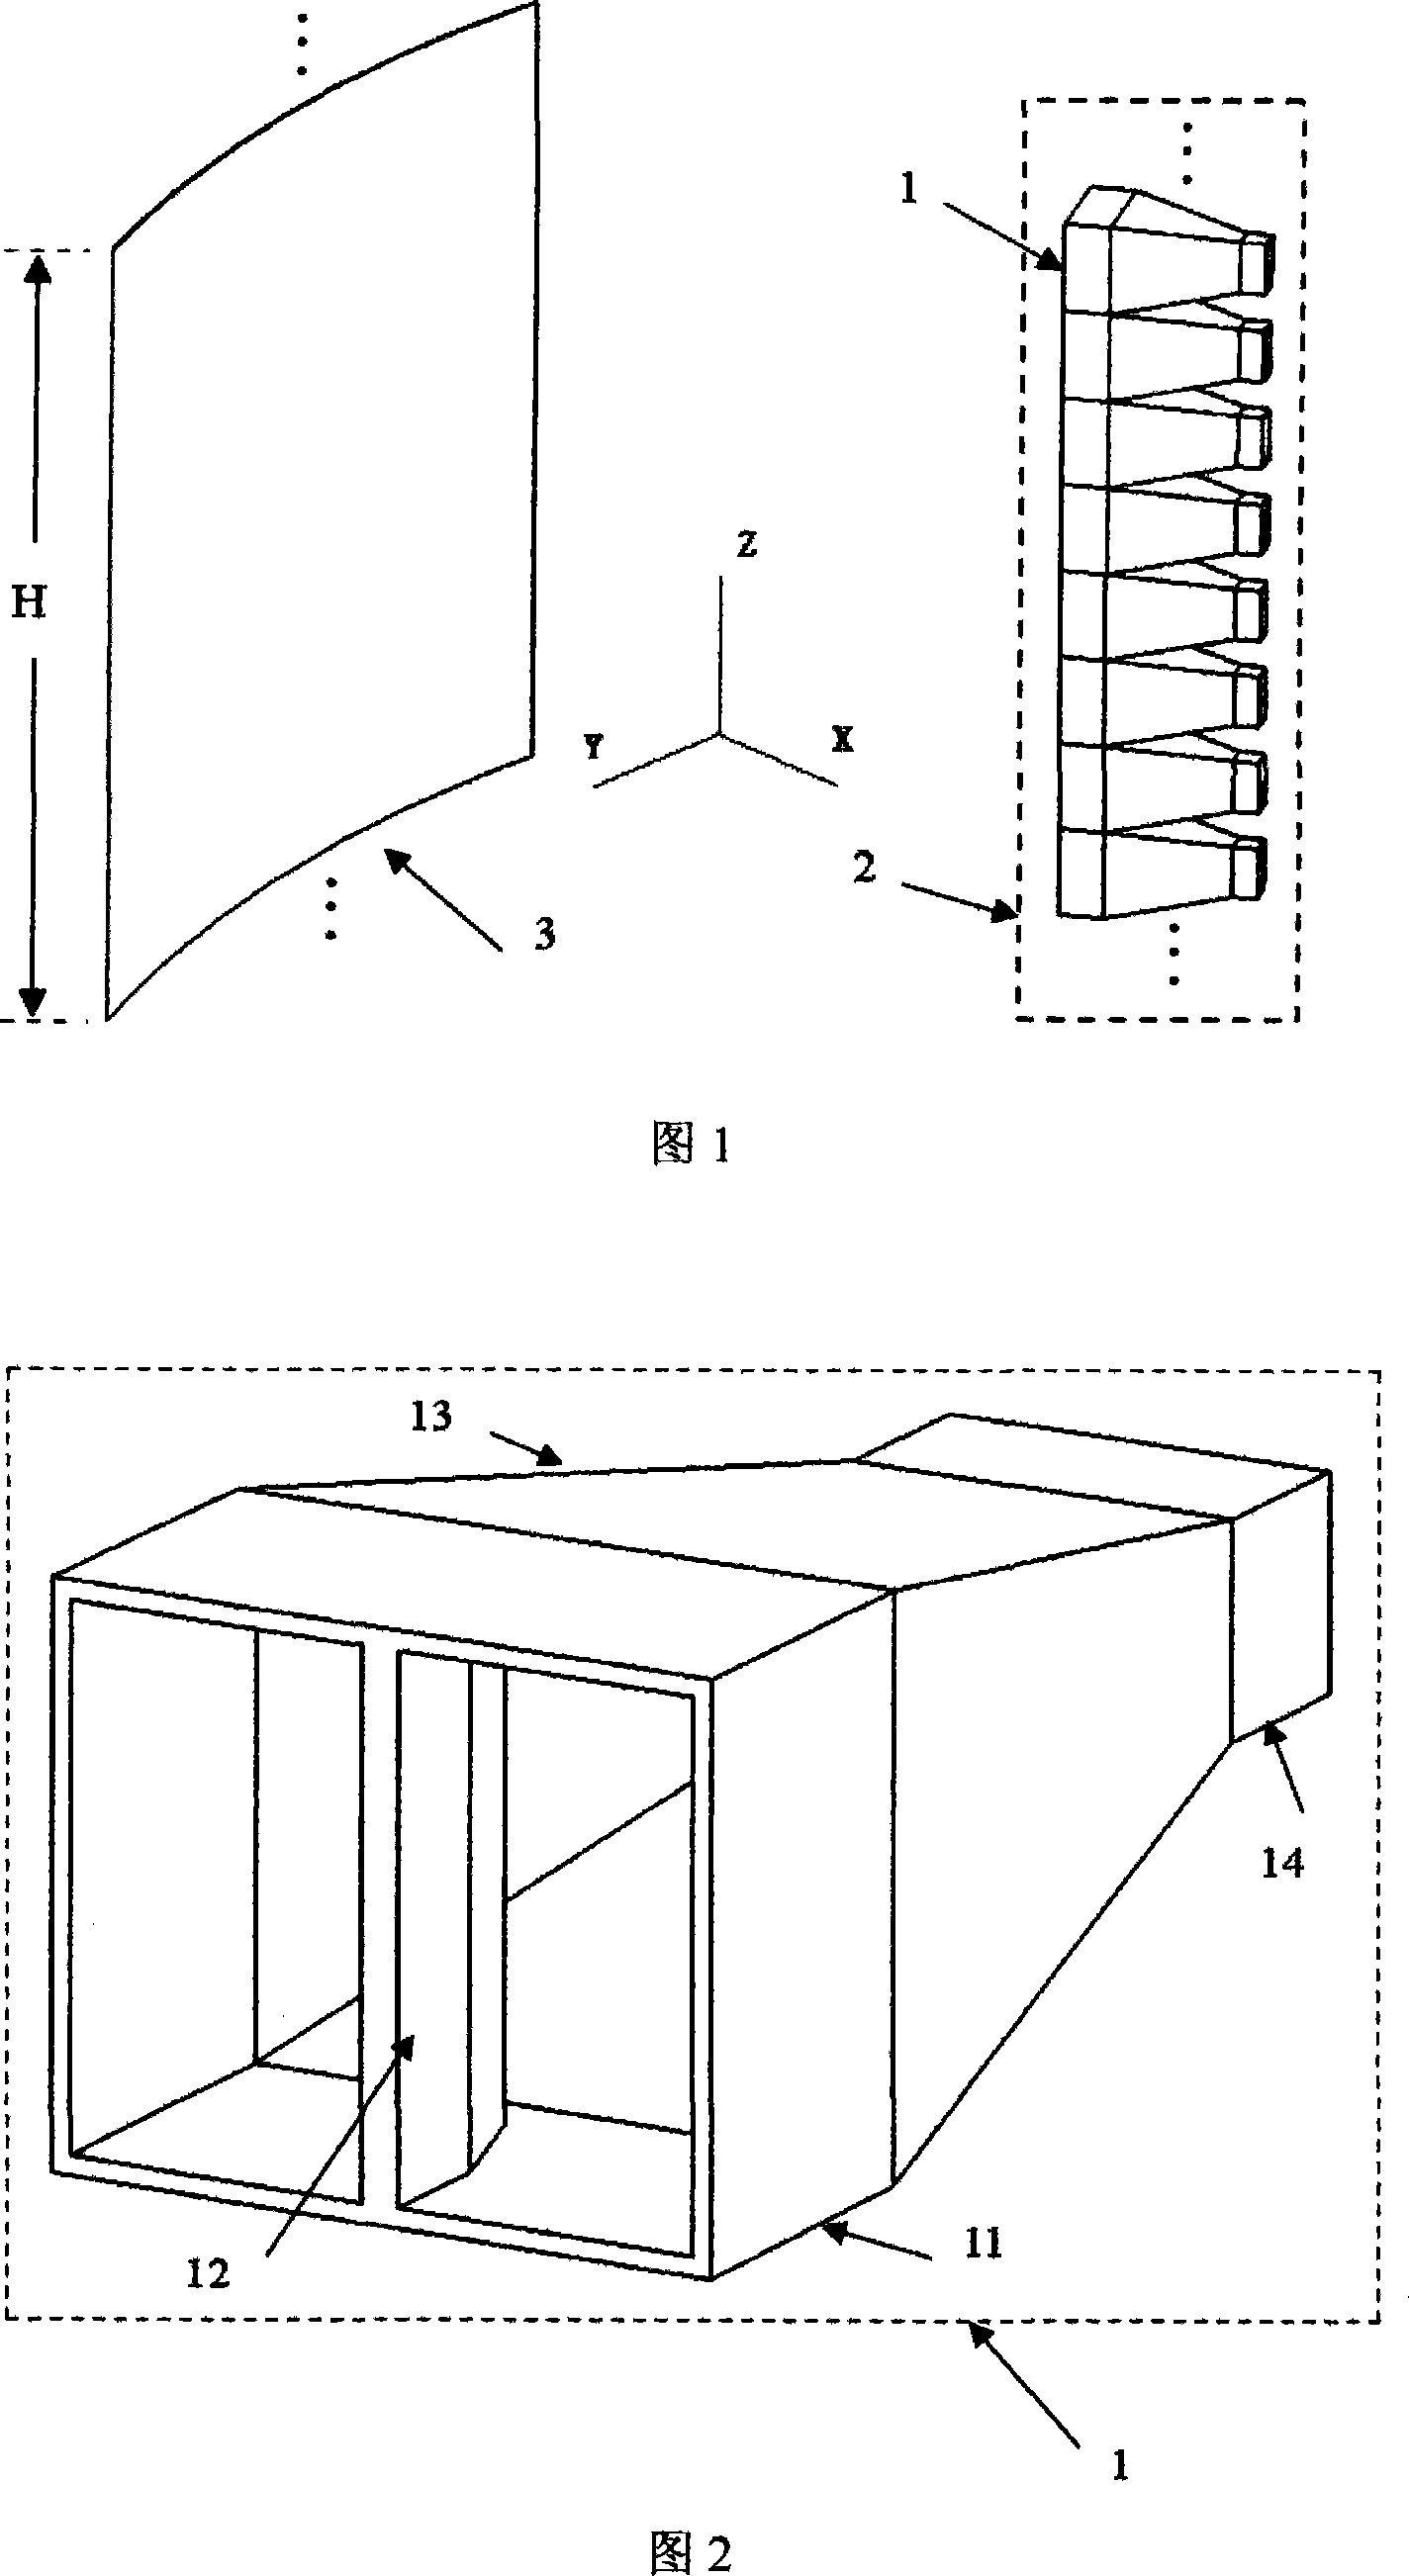 Power dividing horn antenna for space power synthesis and array thereof